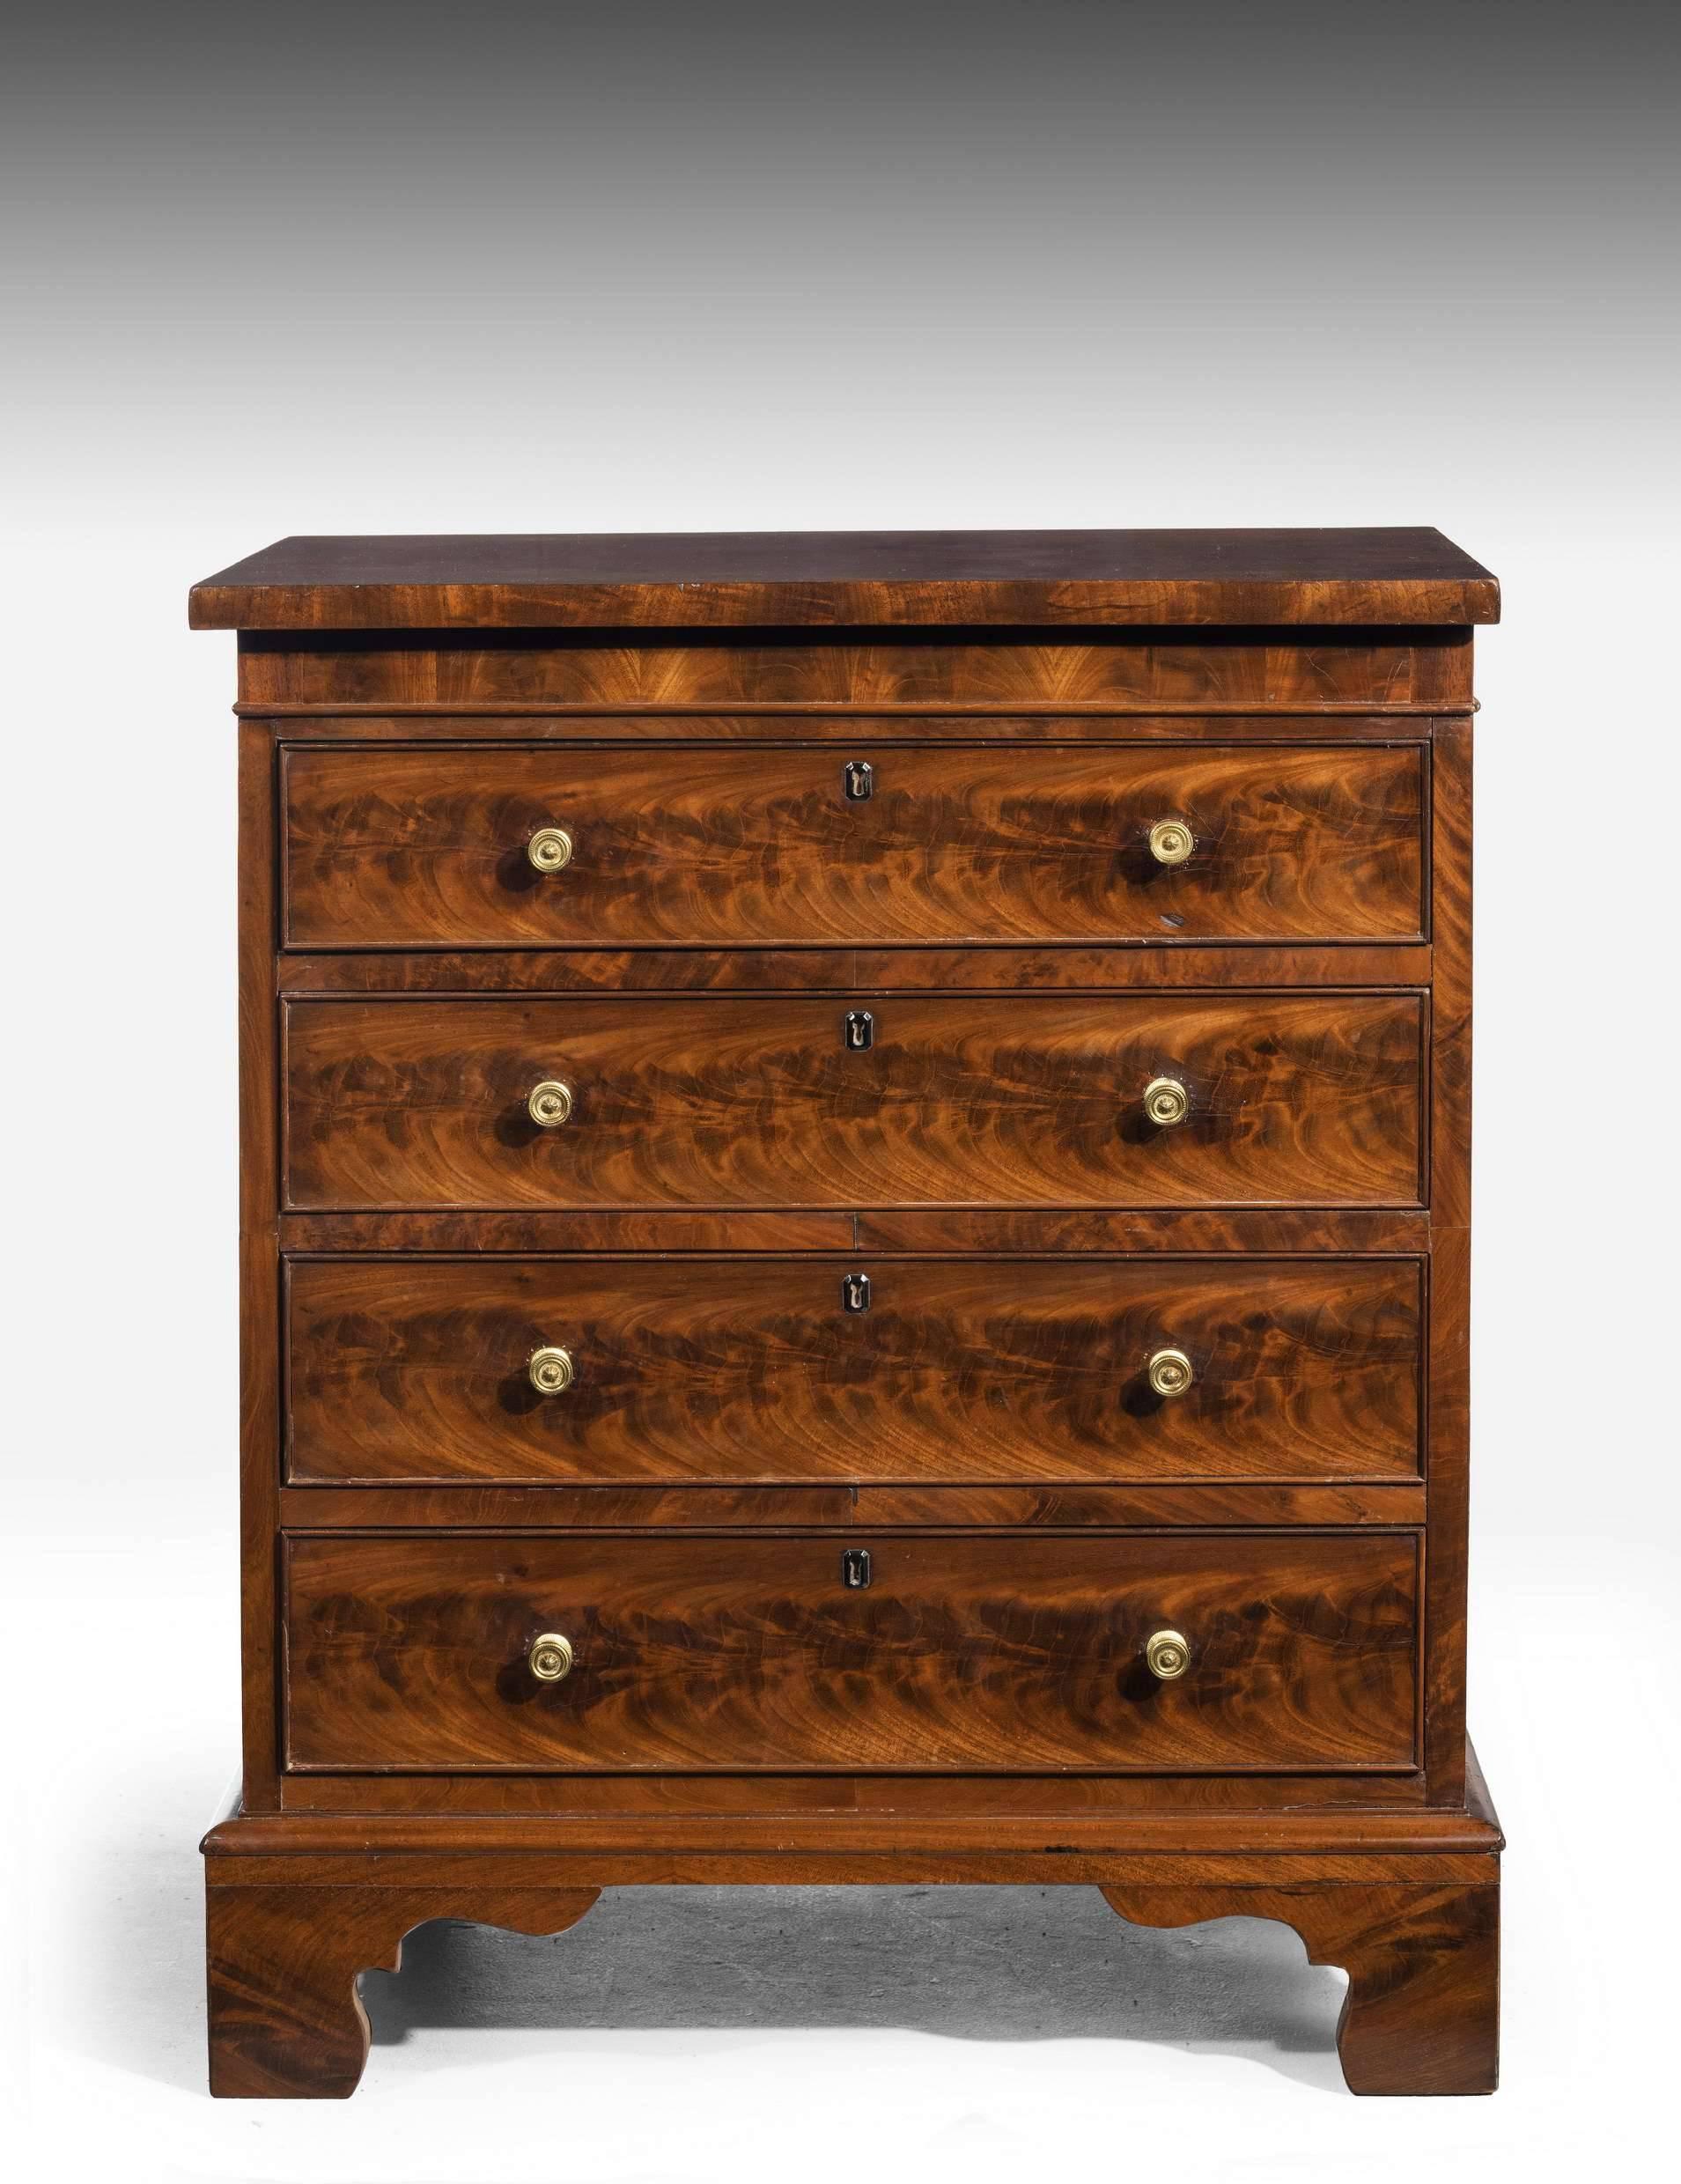 A beautifully figured small George III period lift top commode now converted to a four drawer chest. Exceptionally fine timbers. Period back shaped feet.